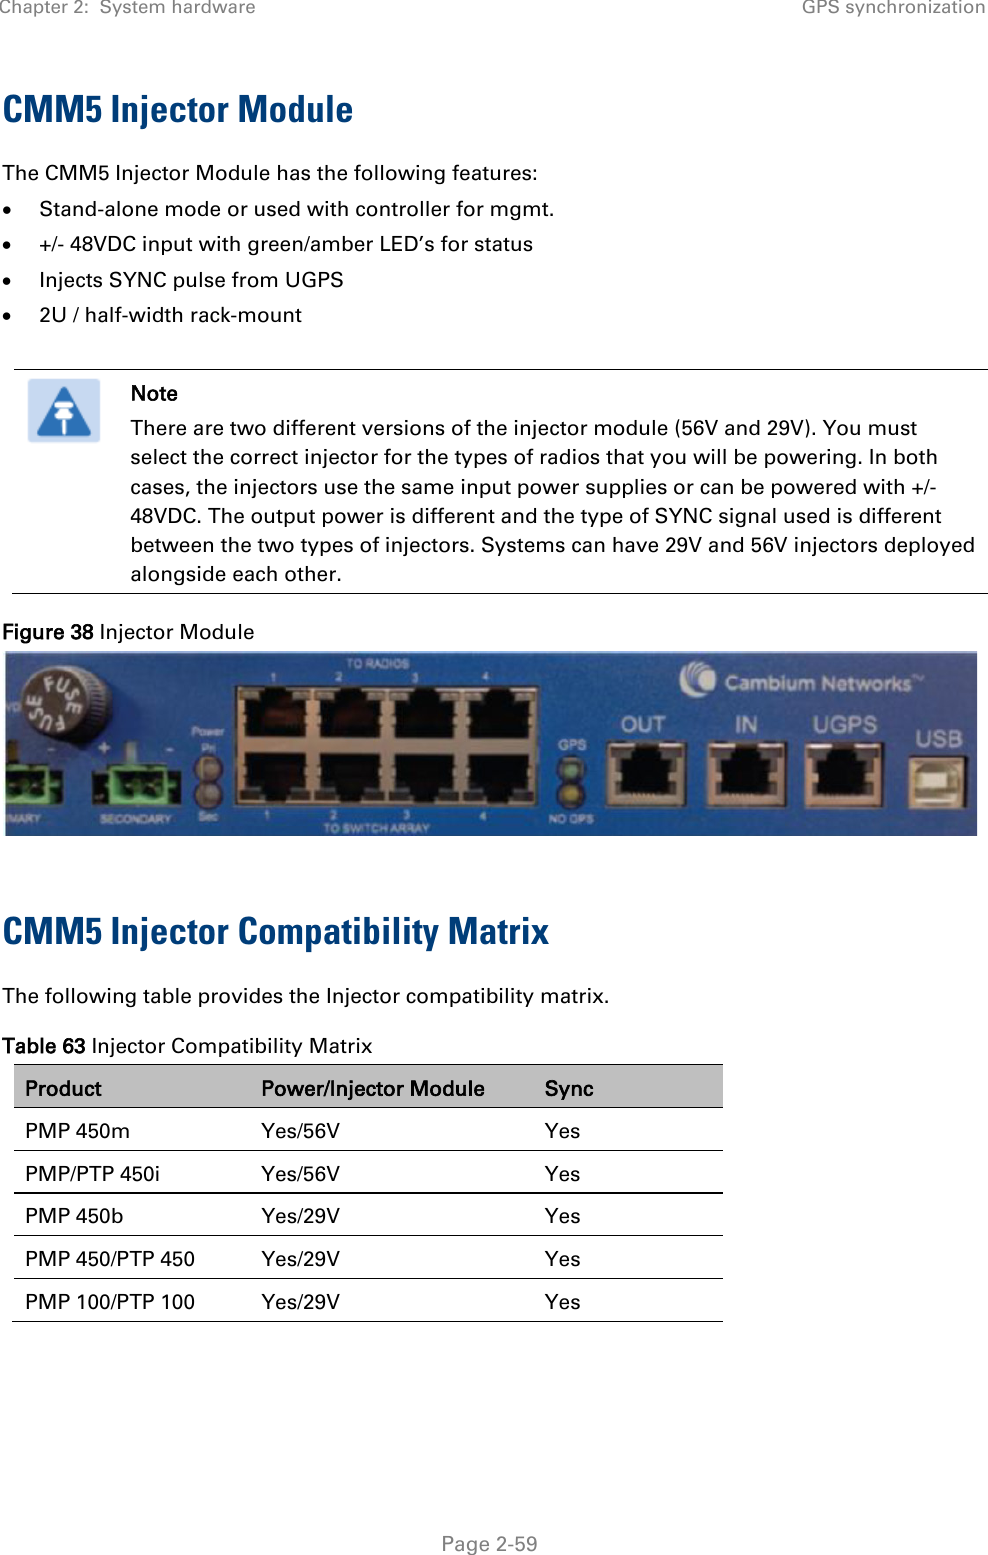 Chapter 2:  System hardware GPS synchronization   Page 2-59 CMM5 Injector Module The CMM5 Injector Module has the following features: • Stand-alone mode or used with controller for mgmt. • +/- 48VDC input with green/amber LED’s for status • Injects SYNC pulse from UGPS • 2U / half-width rack-mount   Note There are two different versions of the injector module (56V and 29V). You must select the correct injector for the types of radios that you will be powering. In both cases, the injectors use the same input power supplies or can be powered with +/- 48VDC. The output power is different and the type of SYNC signal used is different between the two types of injectors. Systems can have 29V and 56V injectors deployed alongside each other. Figure 38 Injector Module   CMM5 Injector Compatibility Matrix The following table provides the Injector compatibility matrix. Table 63 Injector Compatibility Matrix Product Power/Injector Module Sync PMP 450m Yes/56V Yes PMP/PTP 450i Yes/56V Yes PMP 450b  Yes/29V  Yes PMP 450/PTP 450 Yes/29V Yes PMP 100/PTP 100 Yes/29V Yes  